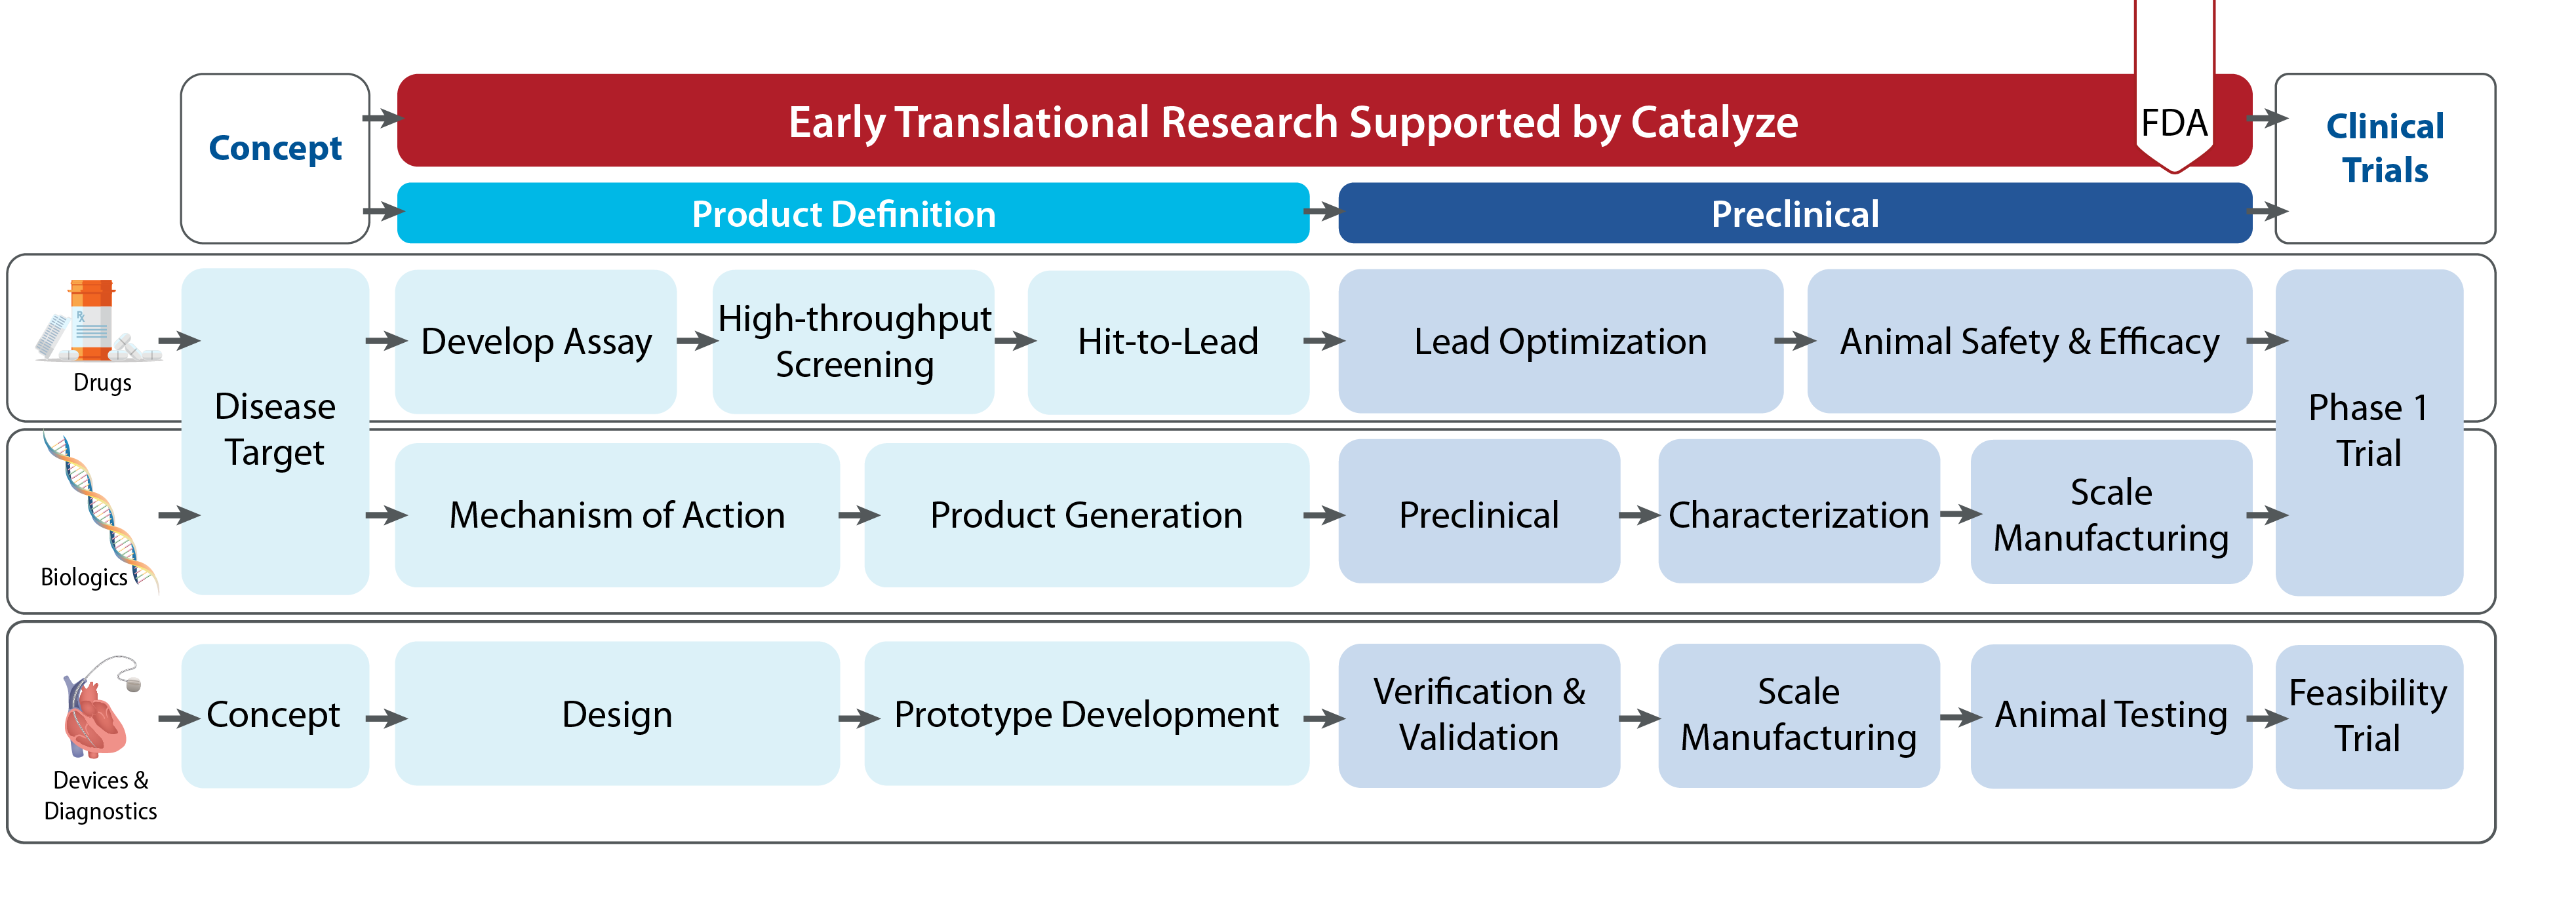 This is a visual depiction of an overview of the Catalyze Program.  The image shows five boxes feeding into a box labeled Catalyze Program below. The first box is titled 'Funding' and says 'Leverages federal investment with matching commitments and flexibility to adjust to challenges'.  The second box is titled 'Coordinated Approach' and says 'Continuum of programs to advance research from validation to first-in-human trials'.  The third box is titled 'Individualized Support' and says 'Milestone-driven project management and support'.  The fourth box is titled 'Program Flexibility' and says 'Ability to adjust the program as needed and to share best practices'.  The fifth box is titled 'Network of Experts' and lists 'Access to key technical experts, Advisory services from NIH and mentoring network, Entrepreneurial education and training, and Cohort-based learning'. The five boxes feed into a final overarching box titled 'Catalyze Program' that says 'Provides a bridge from basic to clinical research across the entire Heart, Lung, Blood, and Sleep research spectrum/Trains a scientific workforce in product development and entrepreneurship'